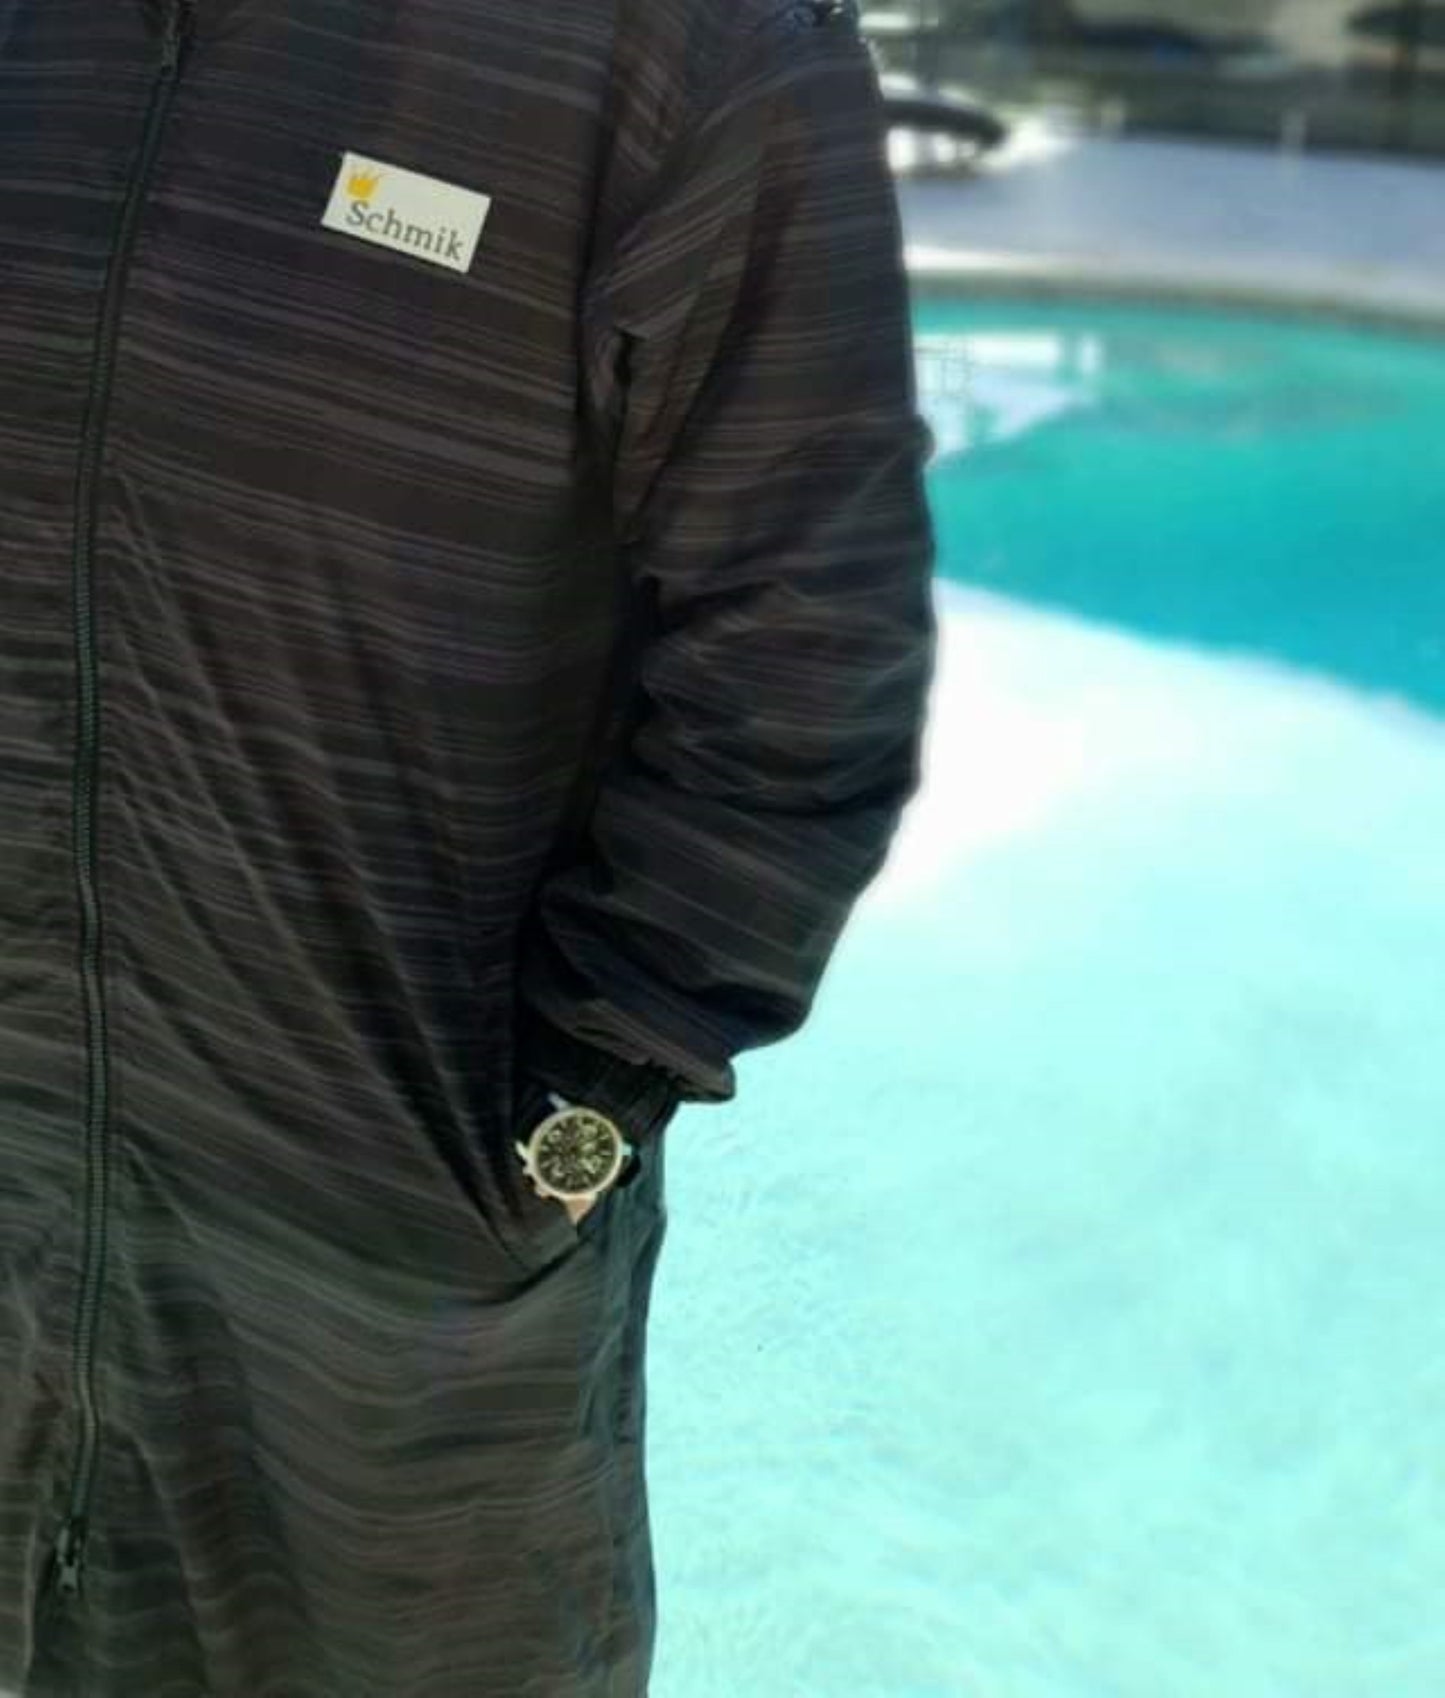 Adult wearing a black print Schmik swim parka. Adult is standing in front of a swimming pool. 